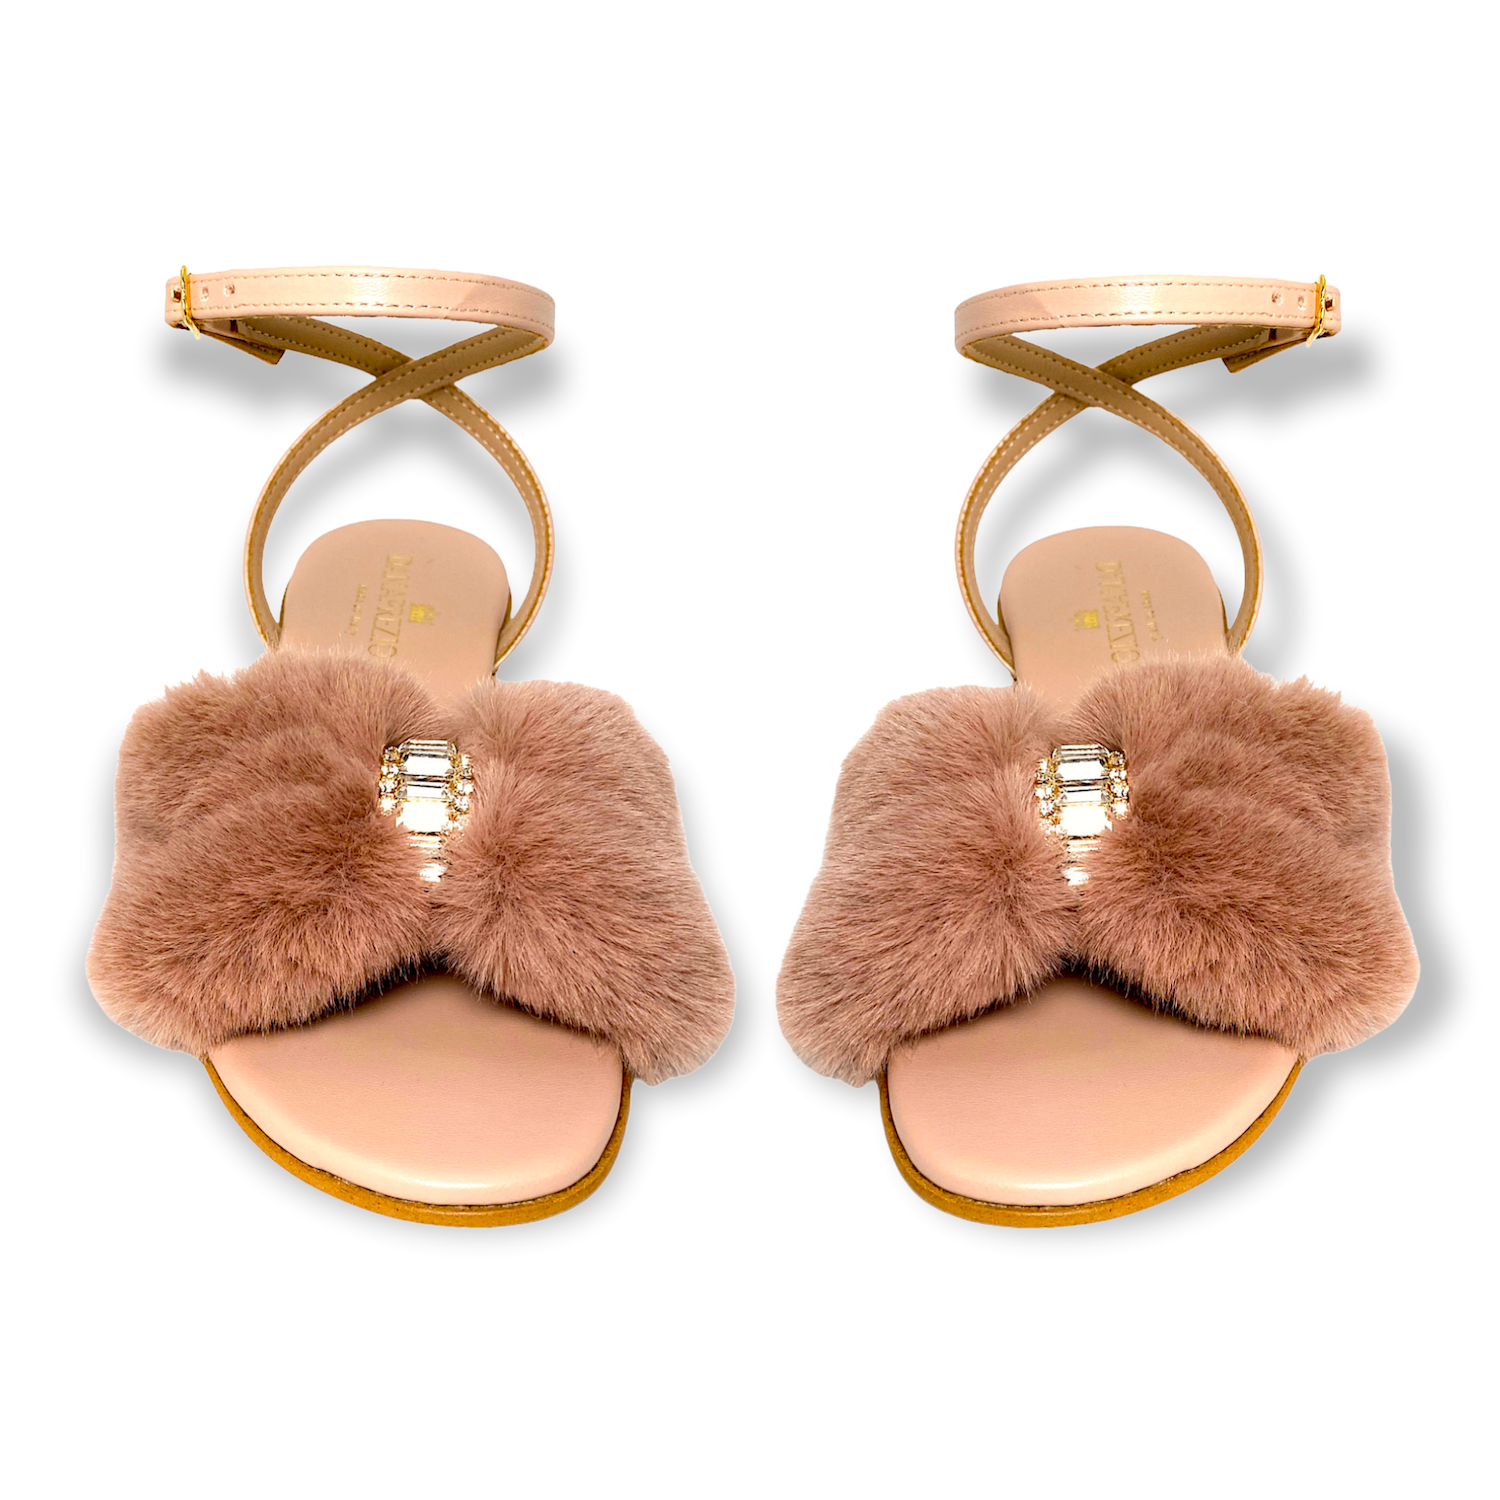 Camilla sandal in nude pink faux fur with crystals